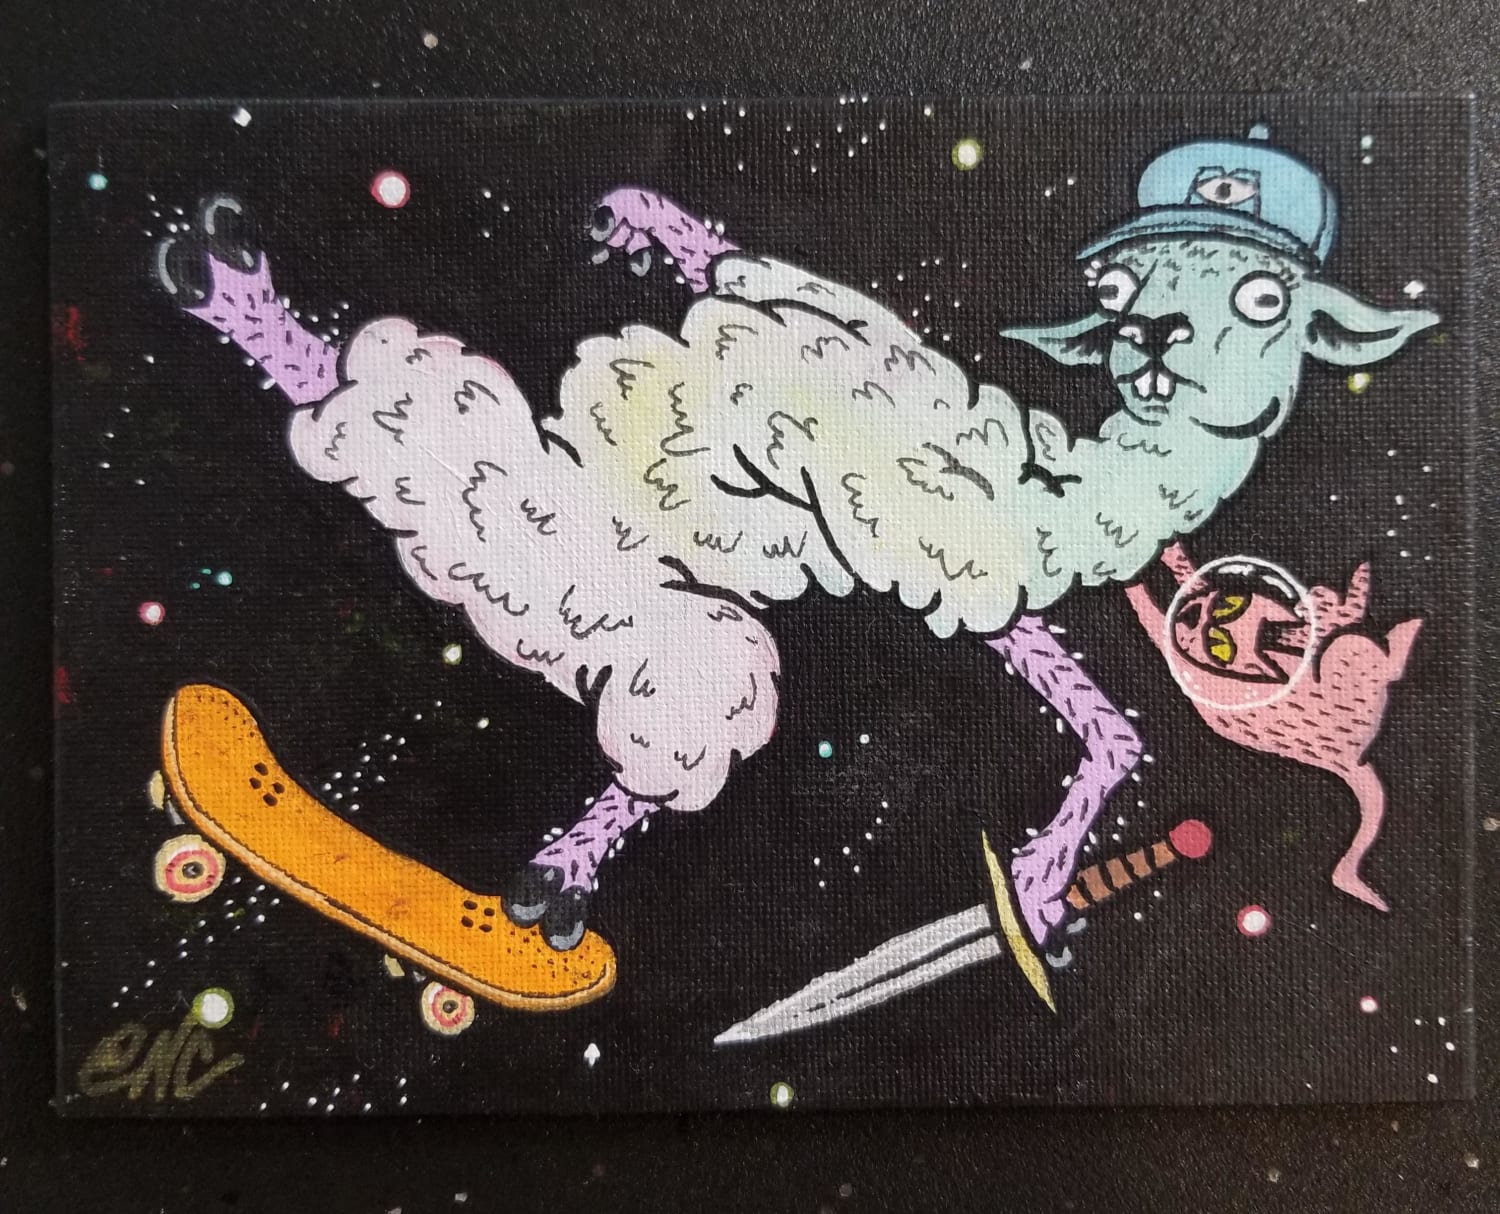 Request from an 11 yr old. "Llama in space riding a skateboard wearing a monster university hat holding a sword and a kitten on its back" Acrylics and mixed media on canvas board by me